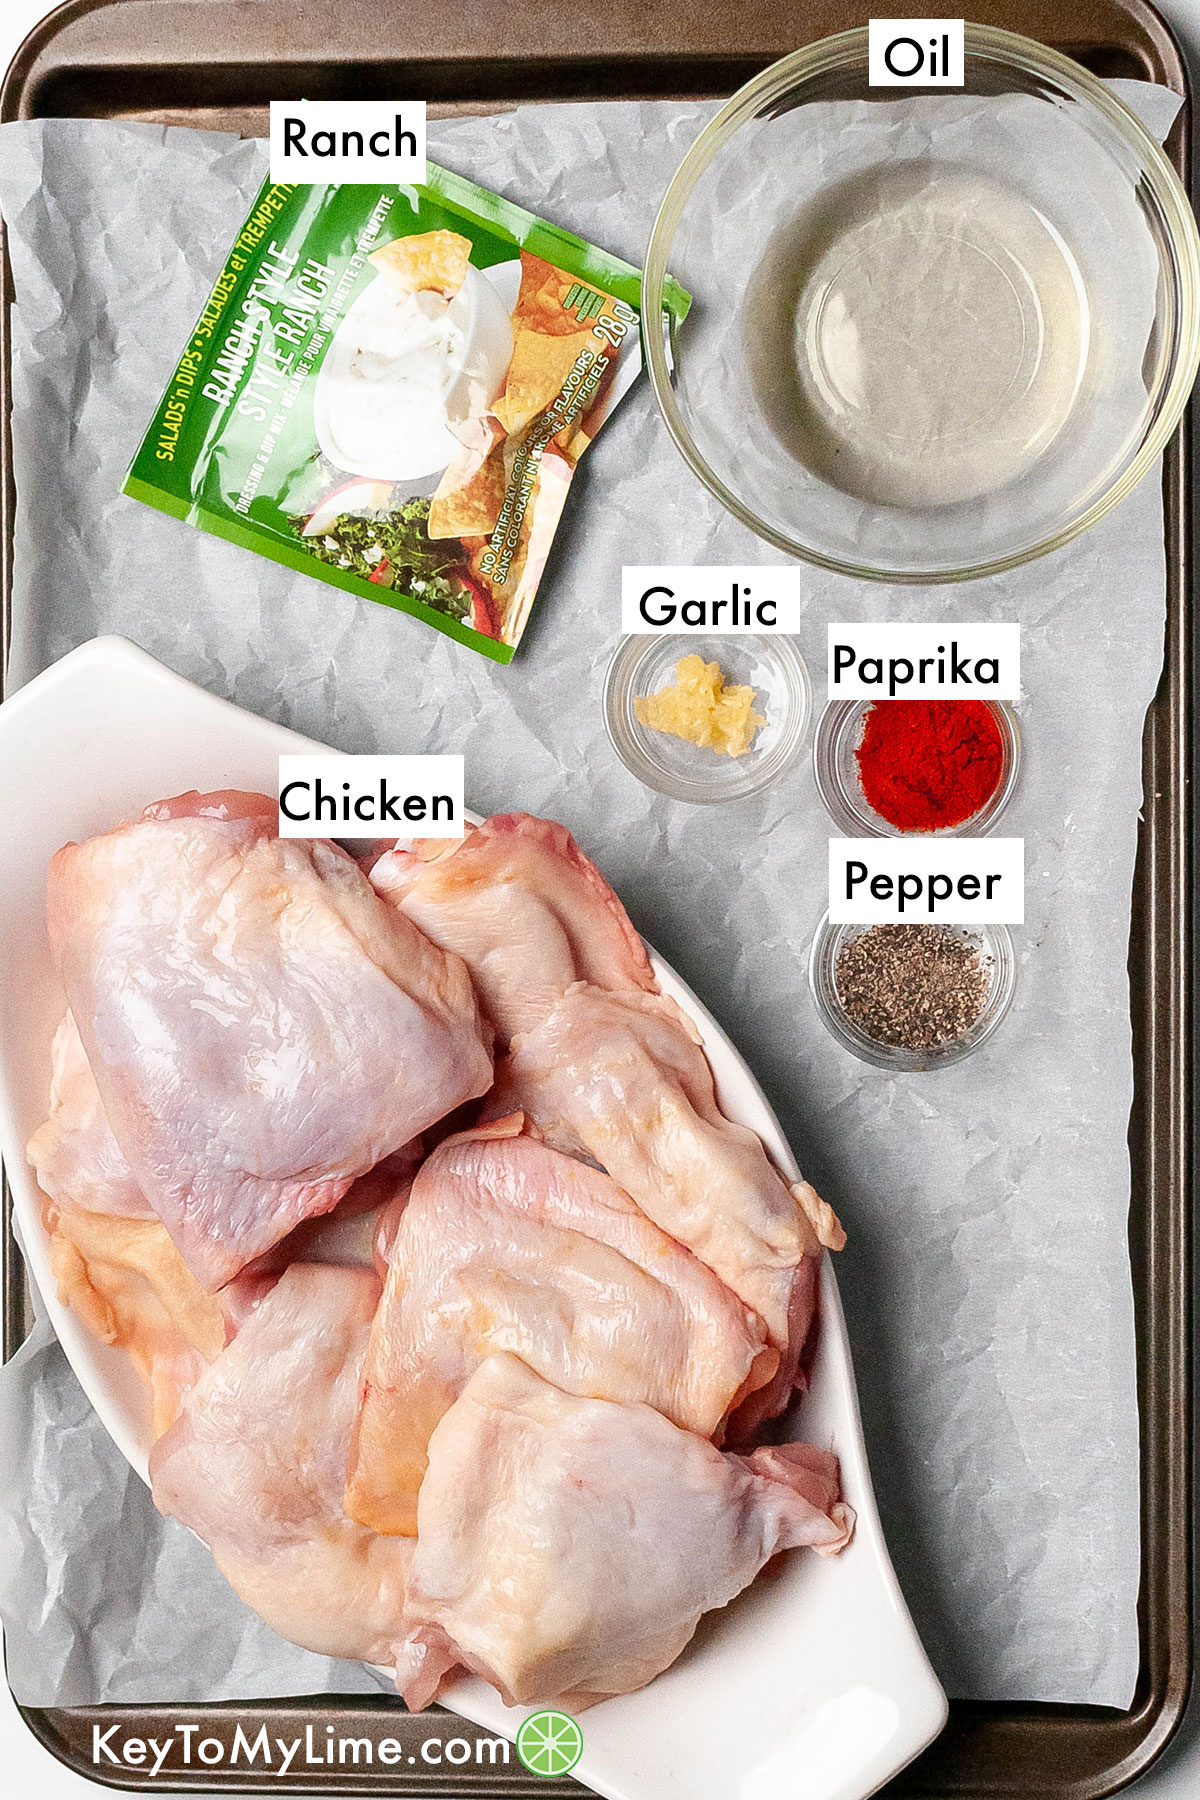 The labeled ingredients for ranch chicken thighs.